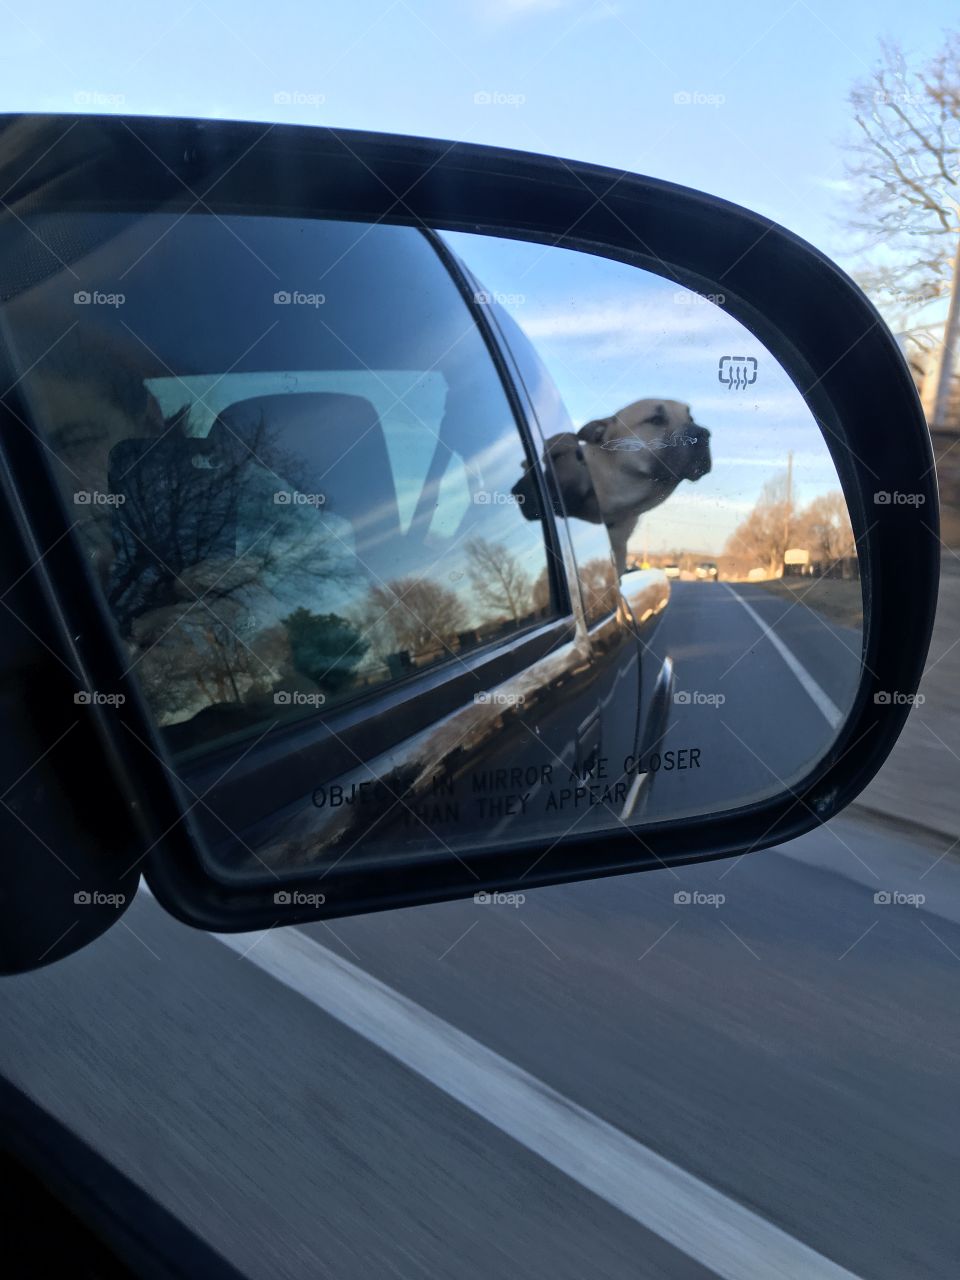 A ride back from the vets from his yearly shots. Watching him through the mirror.